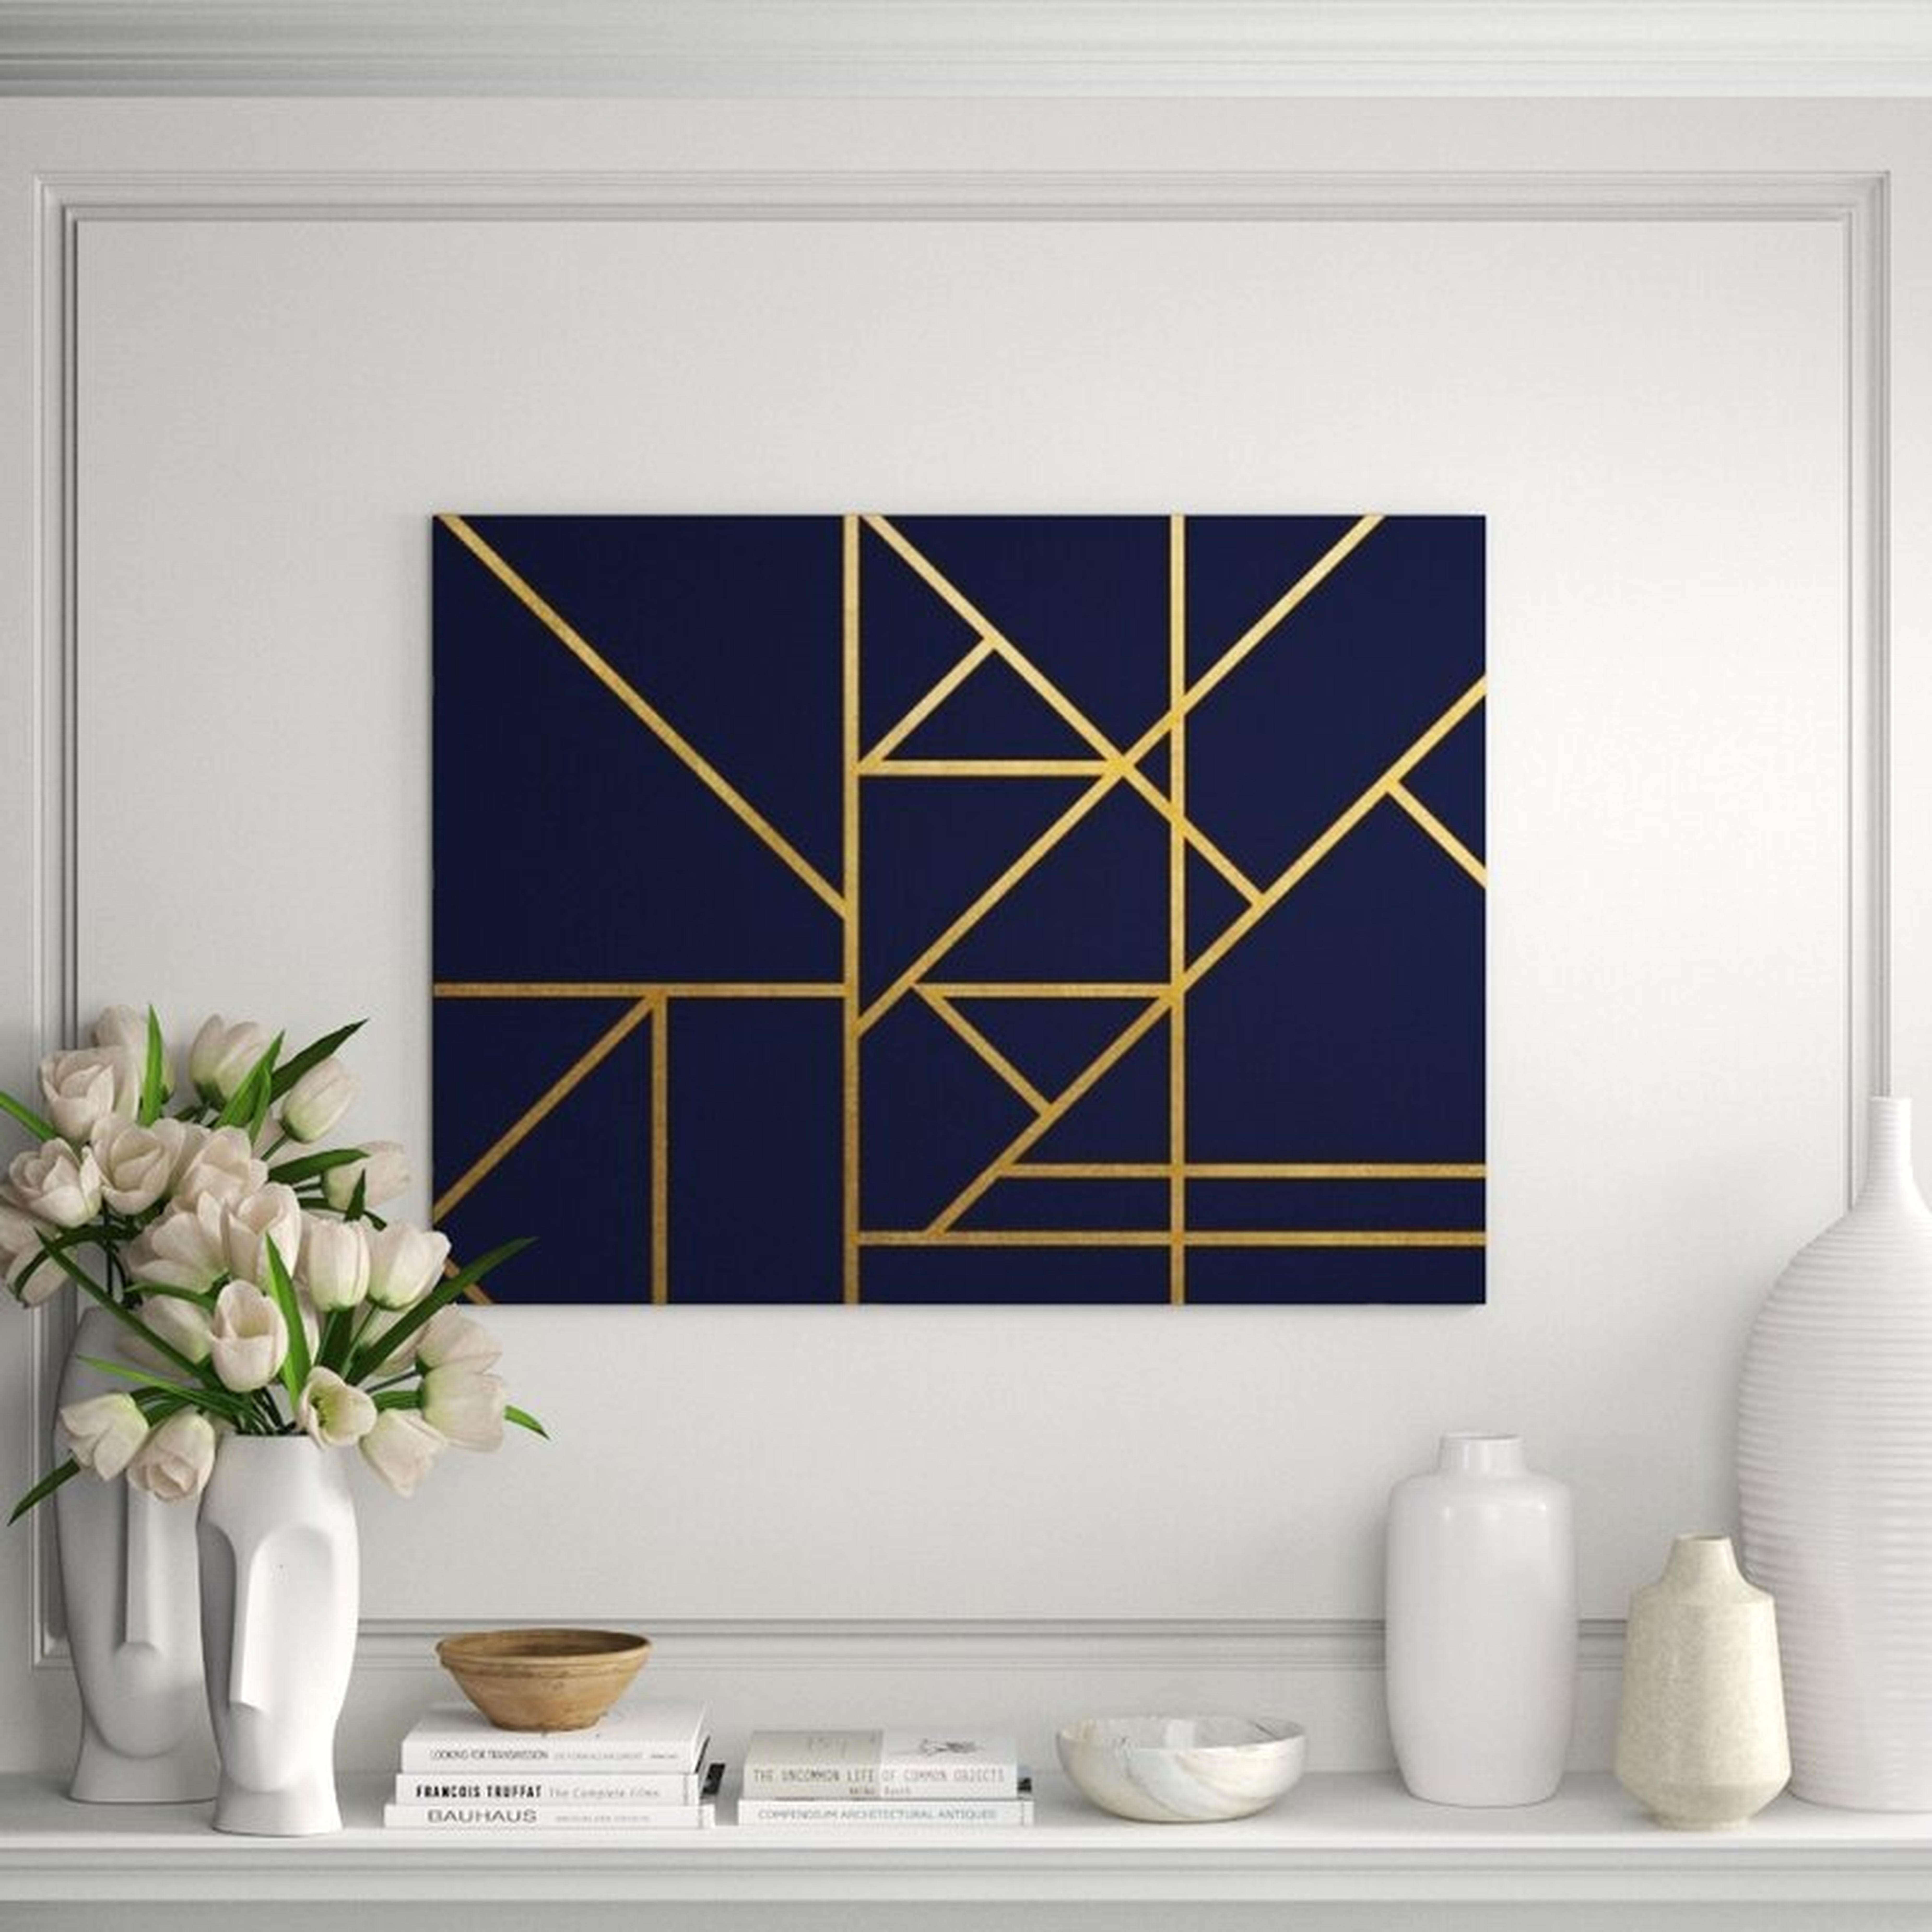 Chelsea Art Studio Gold Navy and Lines IV by Guseul Park - Graphic Art - Perigold